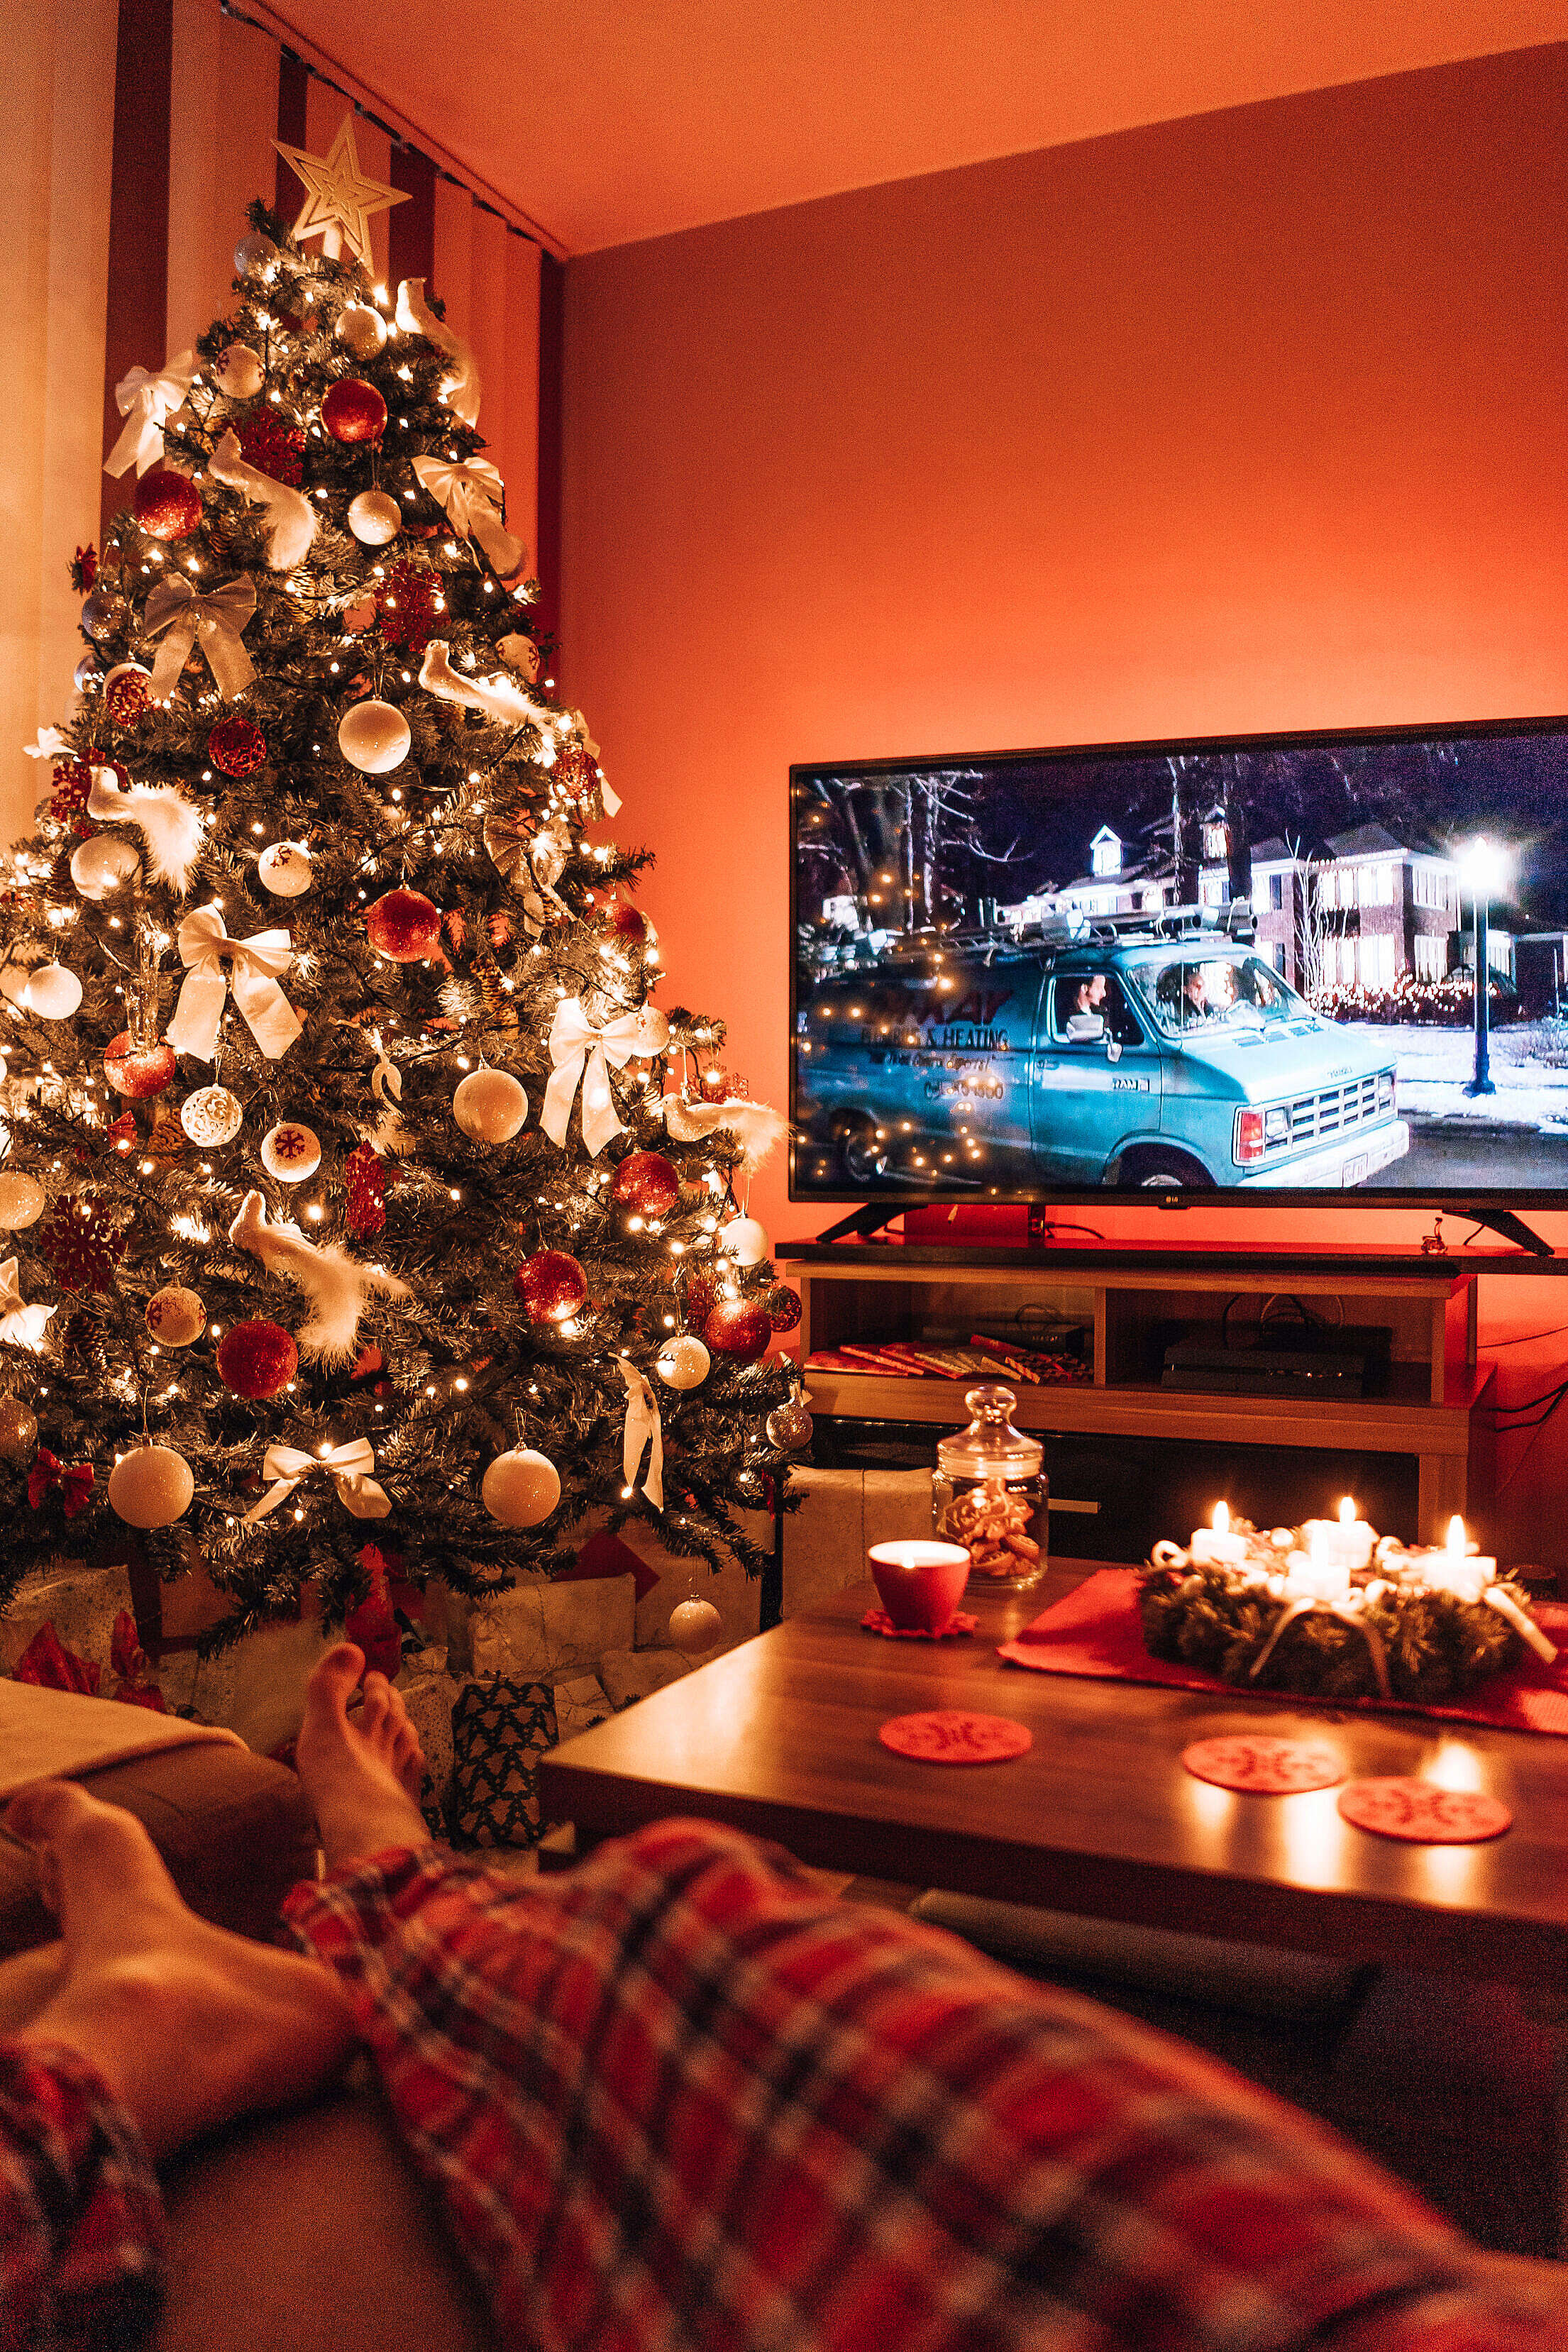 Man Relaxing in a Living Room and Watching a Christmas Movie in the Evening Free Stock Photo